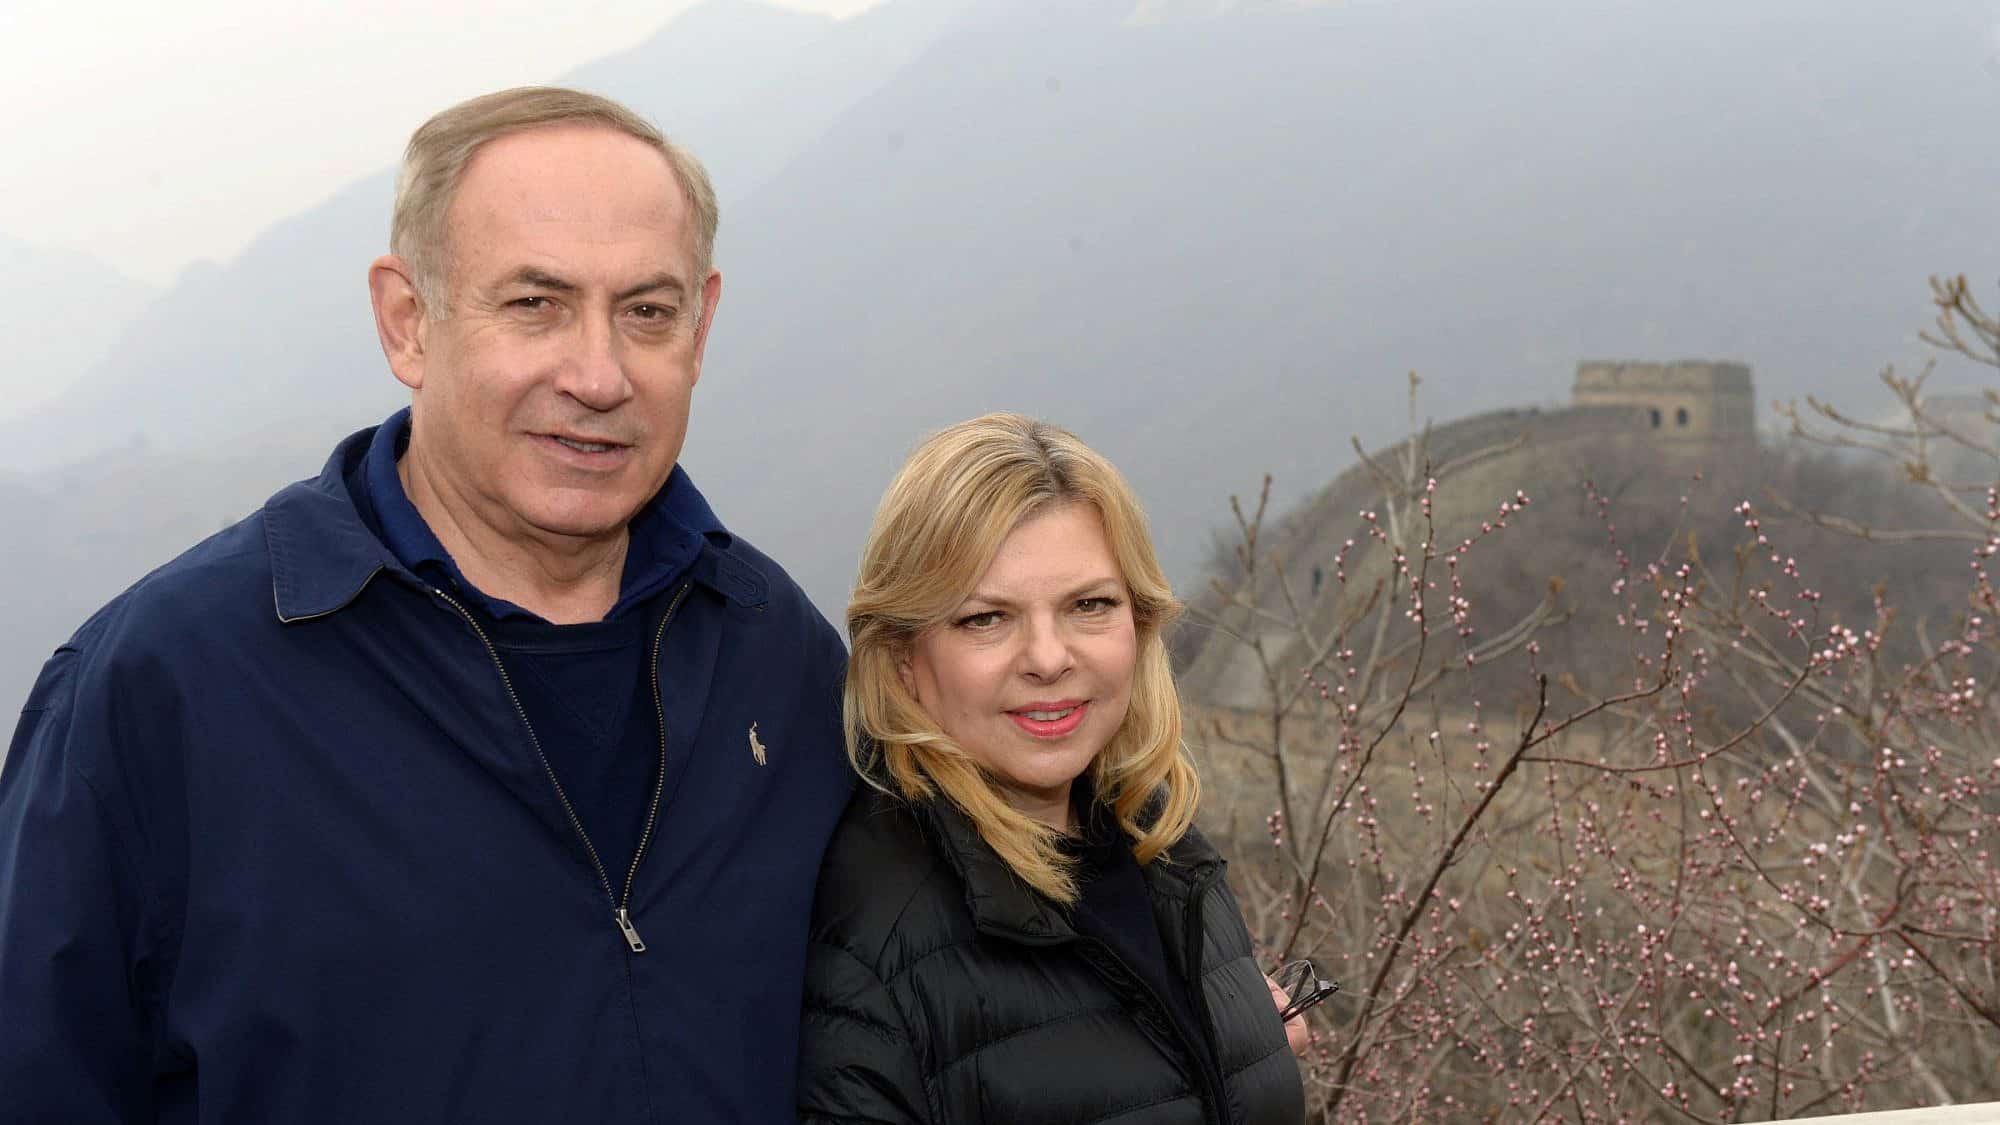 Israeli Prime Minister Benjamin Netanyahu and his wife, Sara, visit the Great Wall of China near Beijing, March 22, 2017. Photo by Haim Zach/GPO.